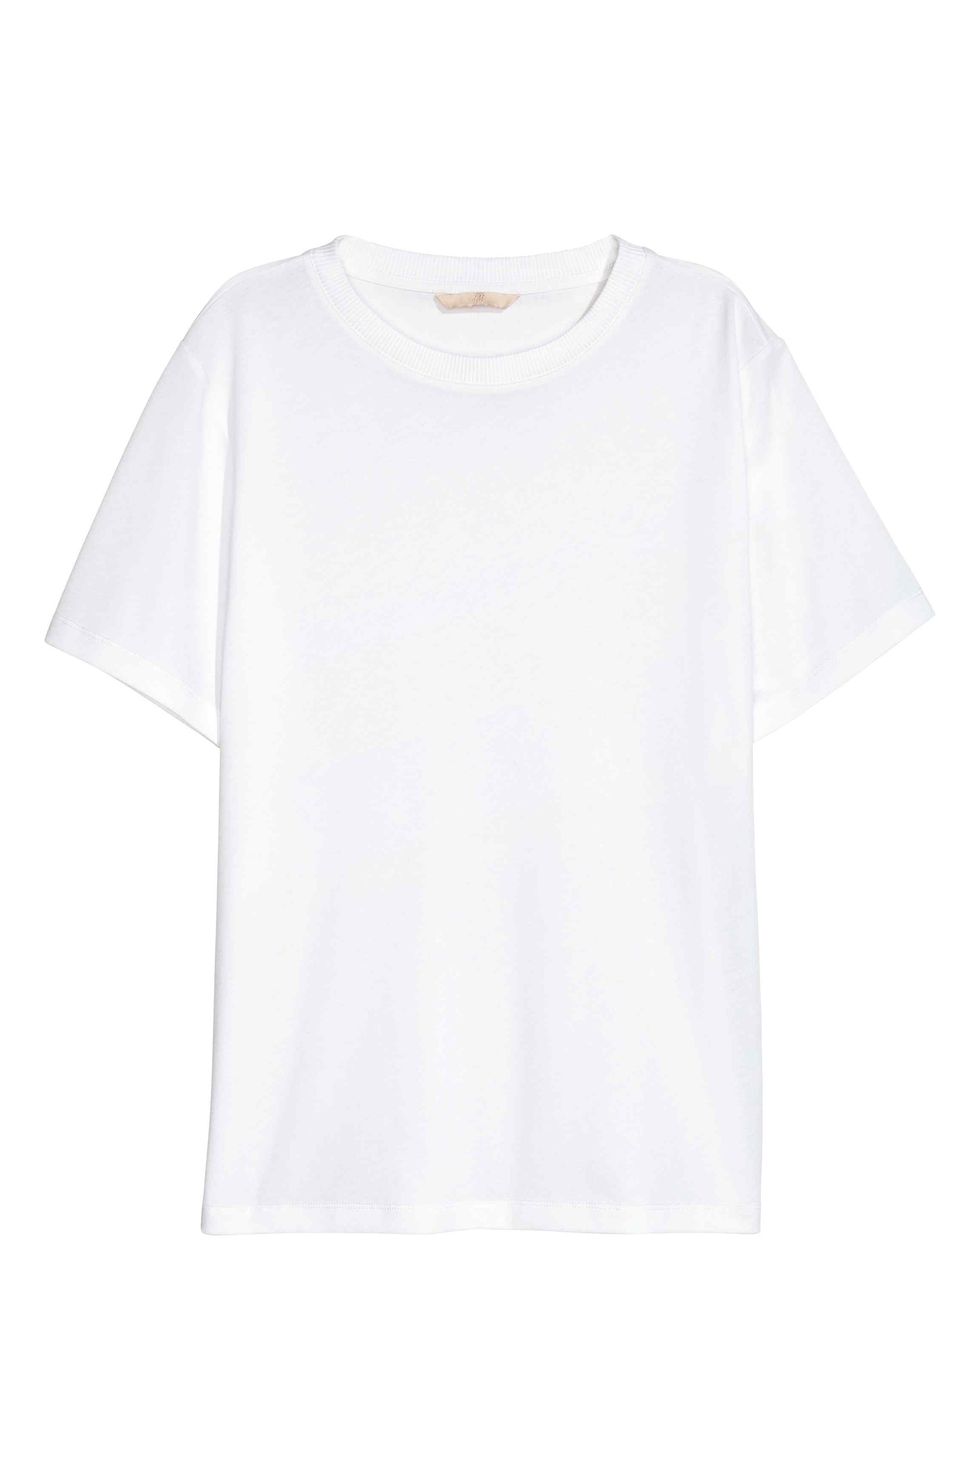 Clothing, White, T-shirt, Sleeve, Top, Blouse, Crop top, Outerwear, Neck, Shirt, 